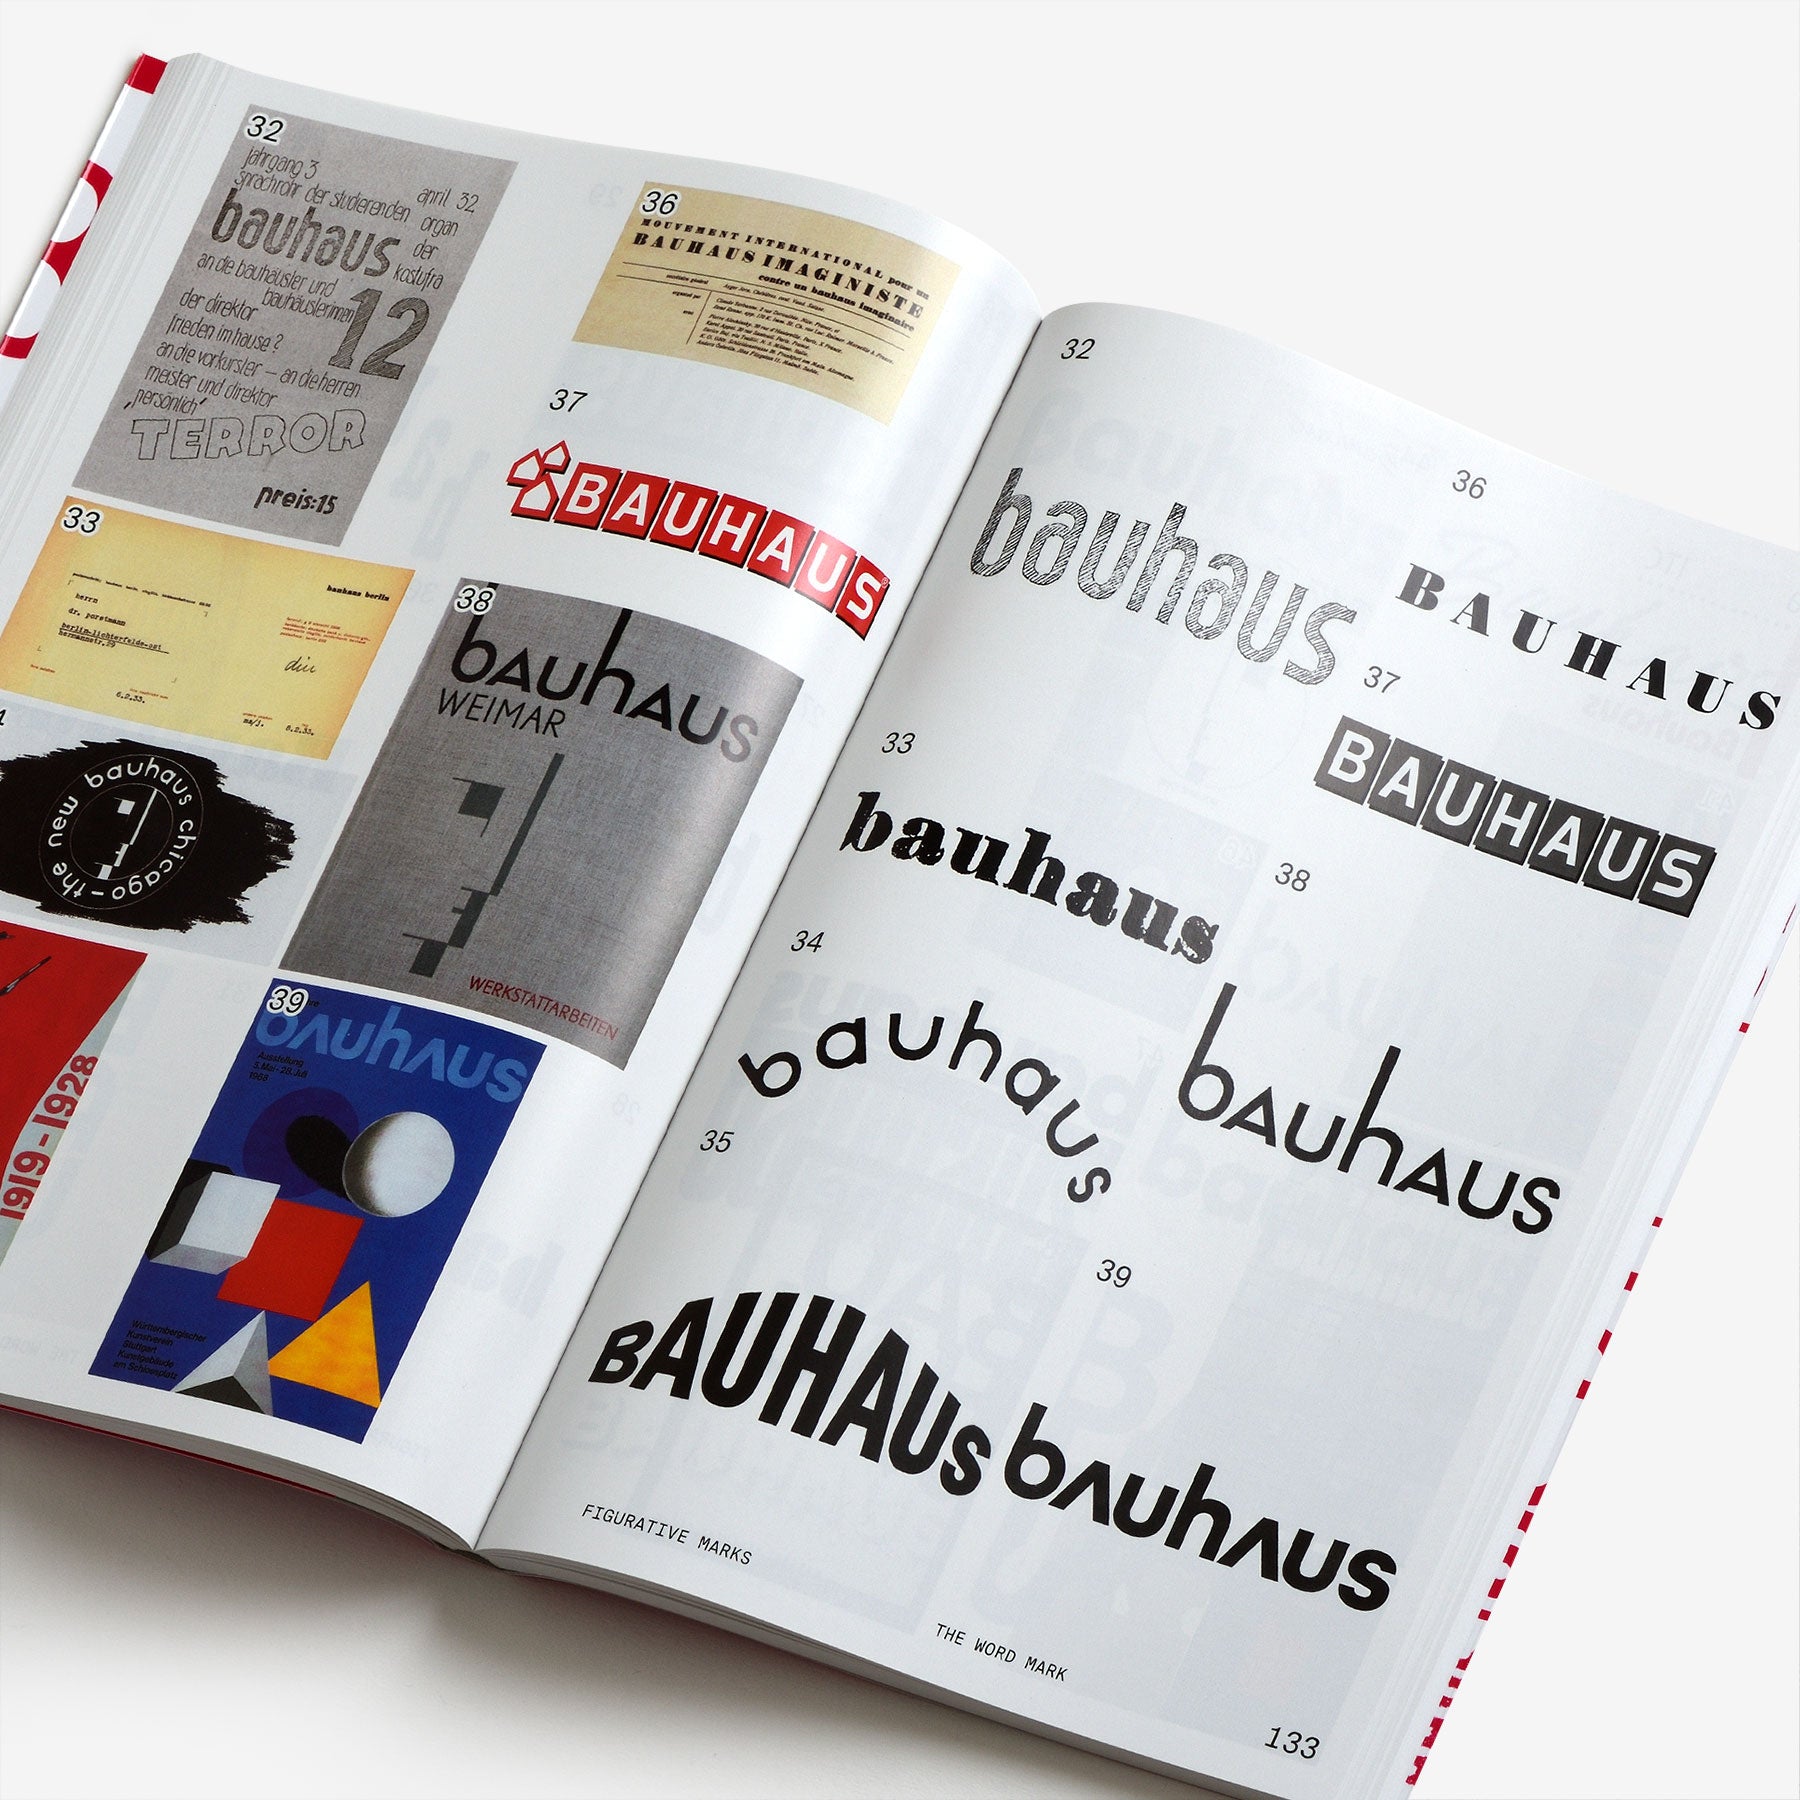 The Bauhaus Brand 1919-2019: The Victory of Iconic Form Over Use